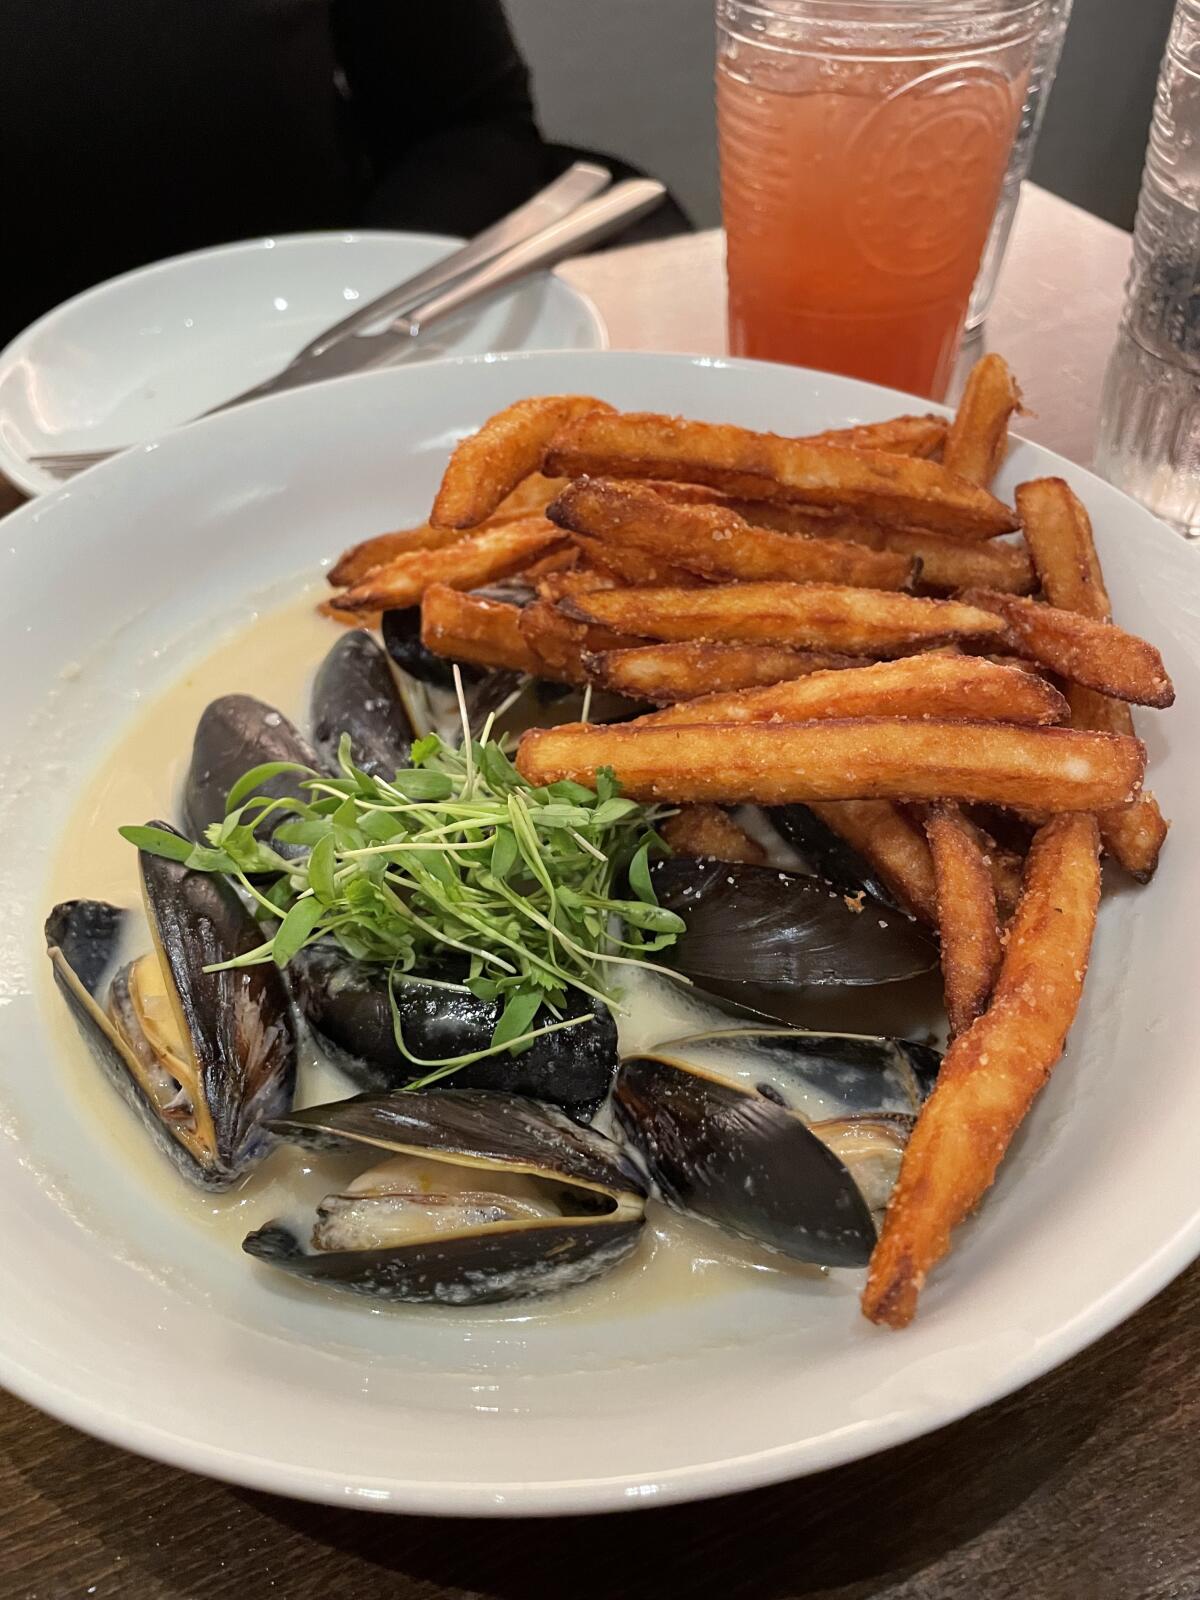 Crisp fries can be added on to the steamed PEI mussels in green curry to make them “moule-frites”.